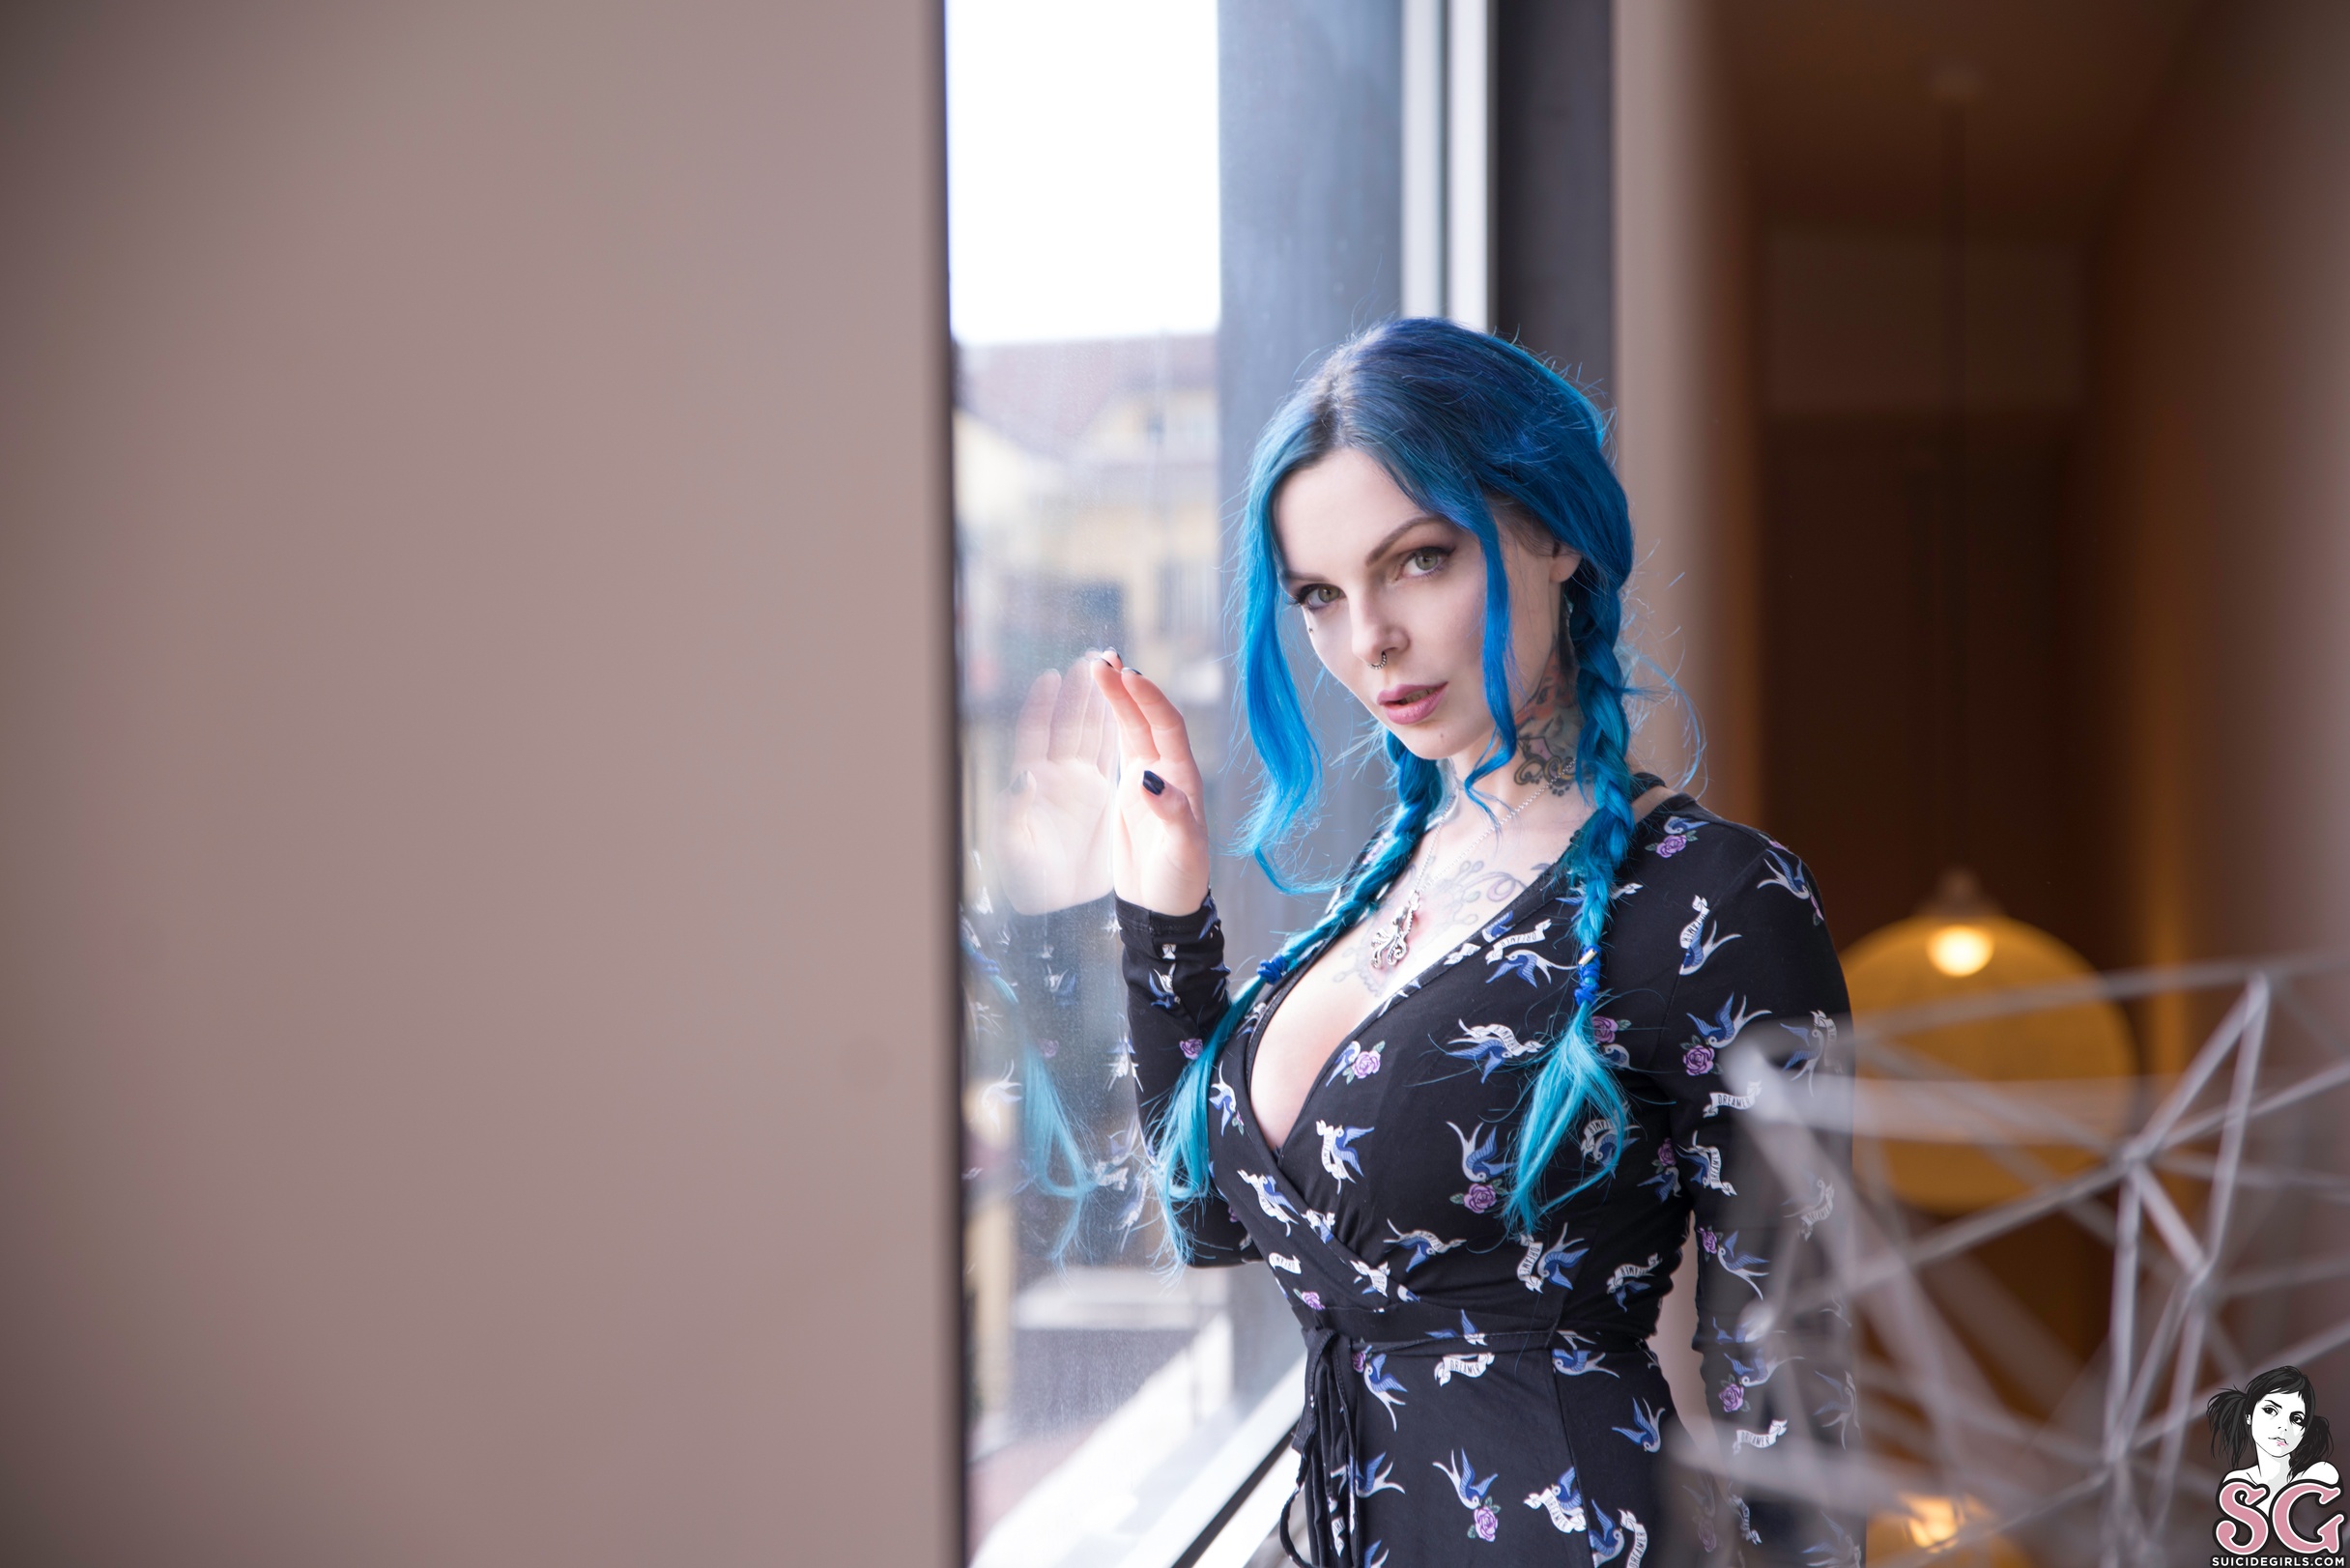 Blue Hair Looking At Viewer Necklace By The Window Open Mouth Depth Of Field Photography Tattoo Wome 2432x1623